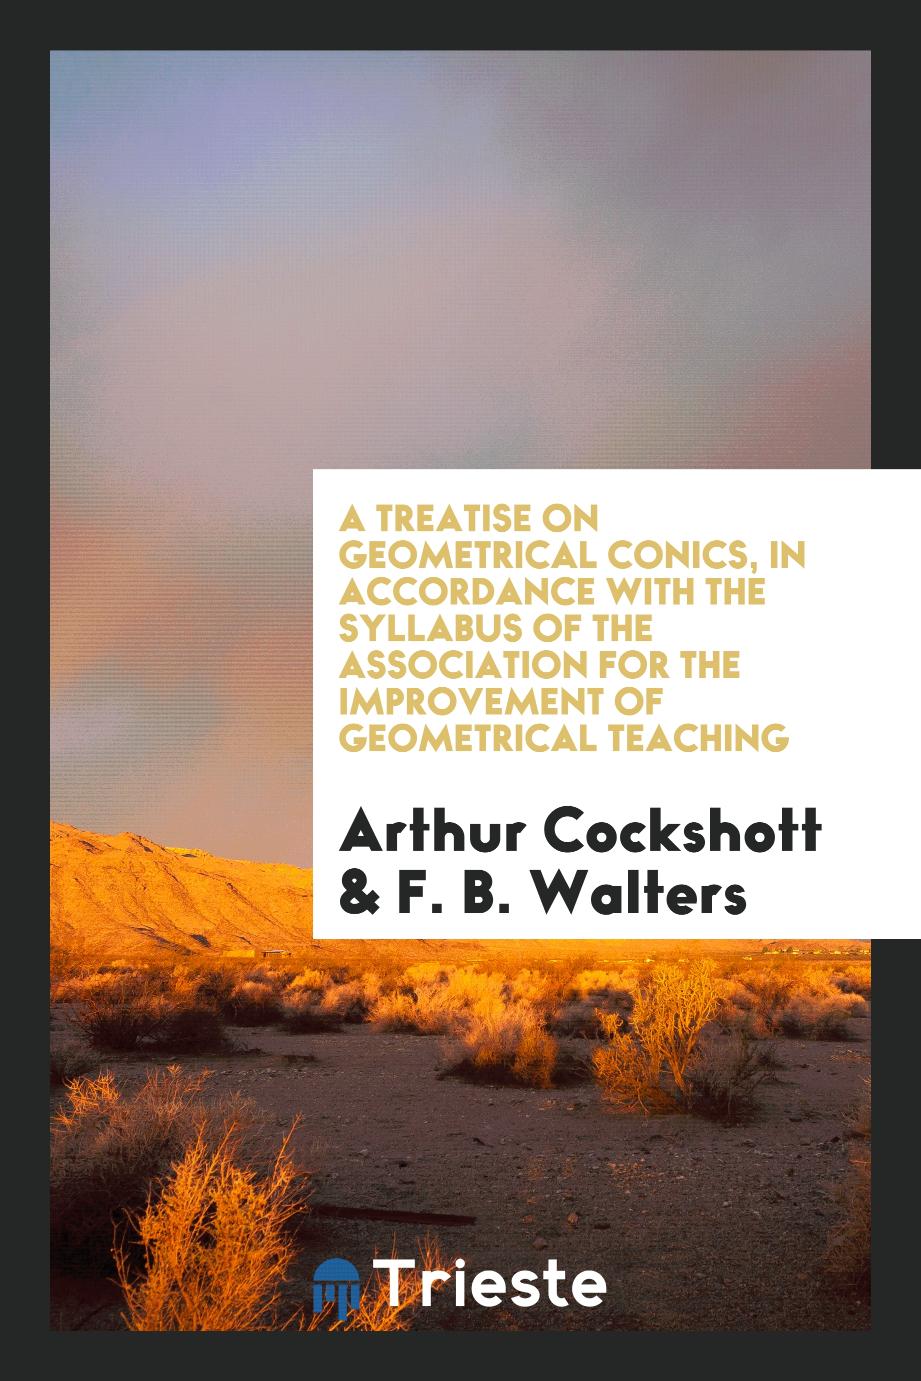 A treatise on geometrical conics, in accordance with the syllabus of the association for the improvement of geometrical teaching